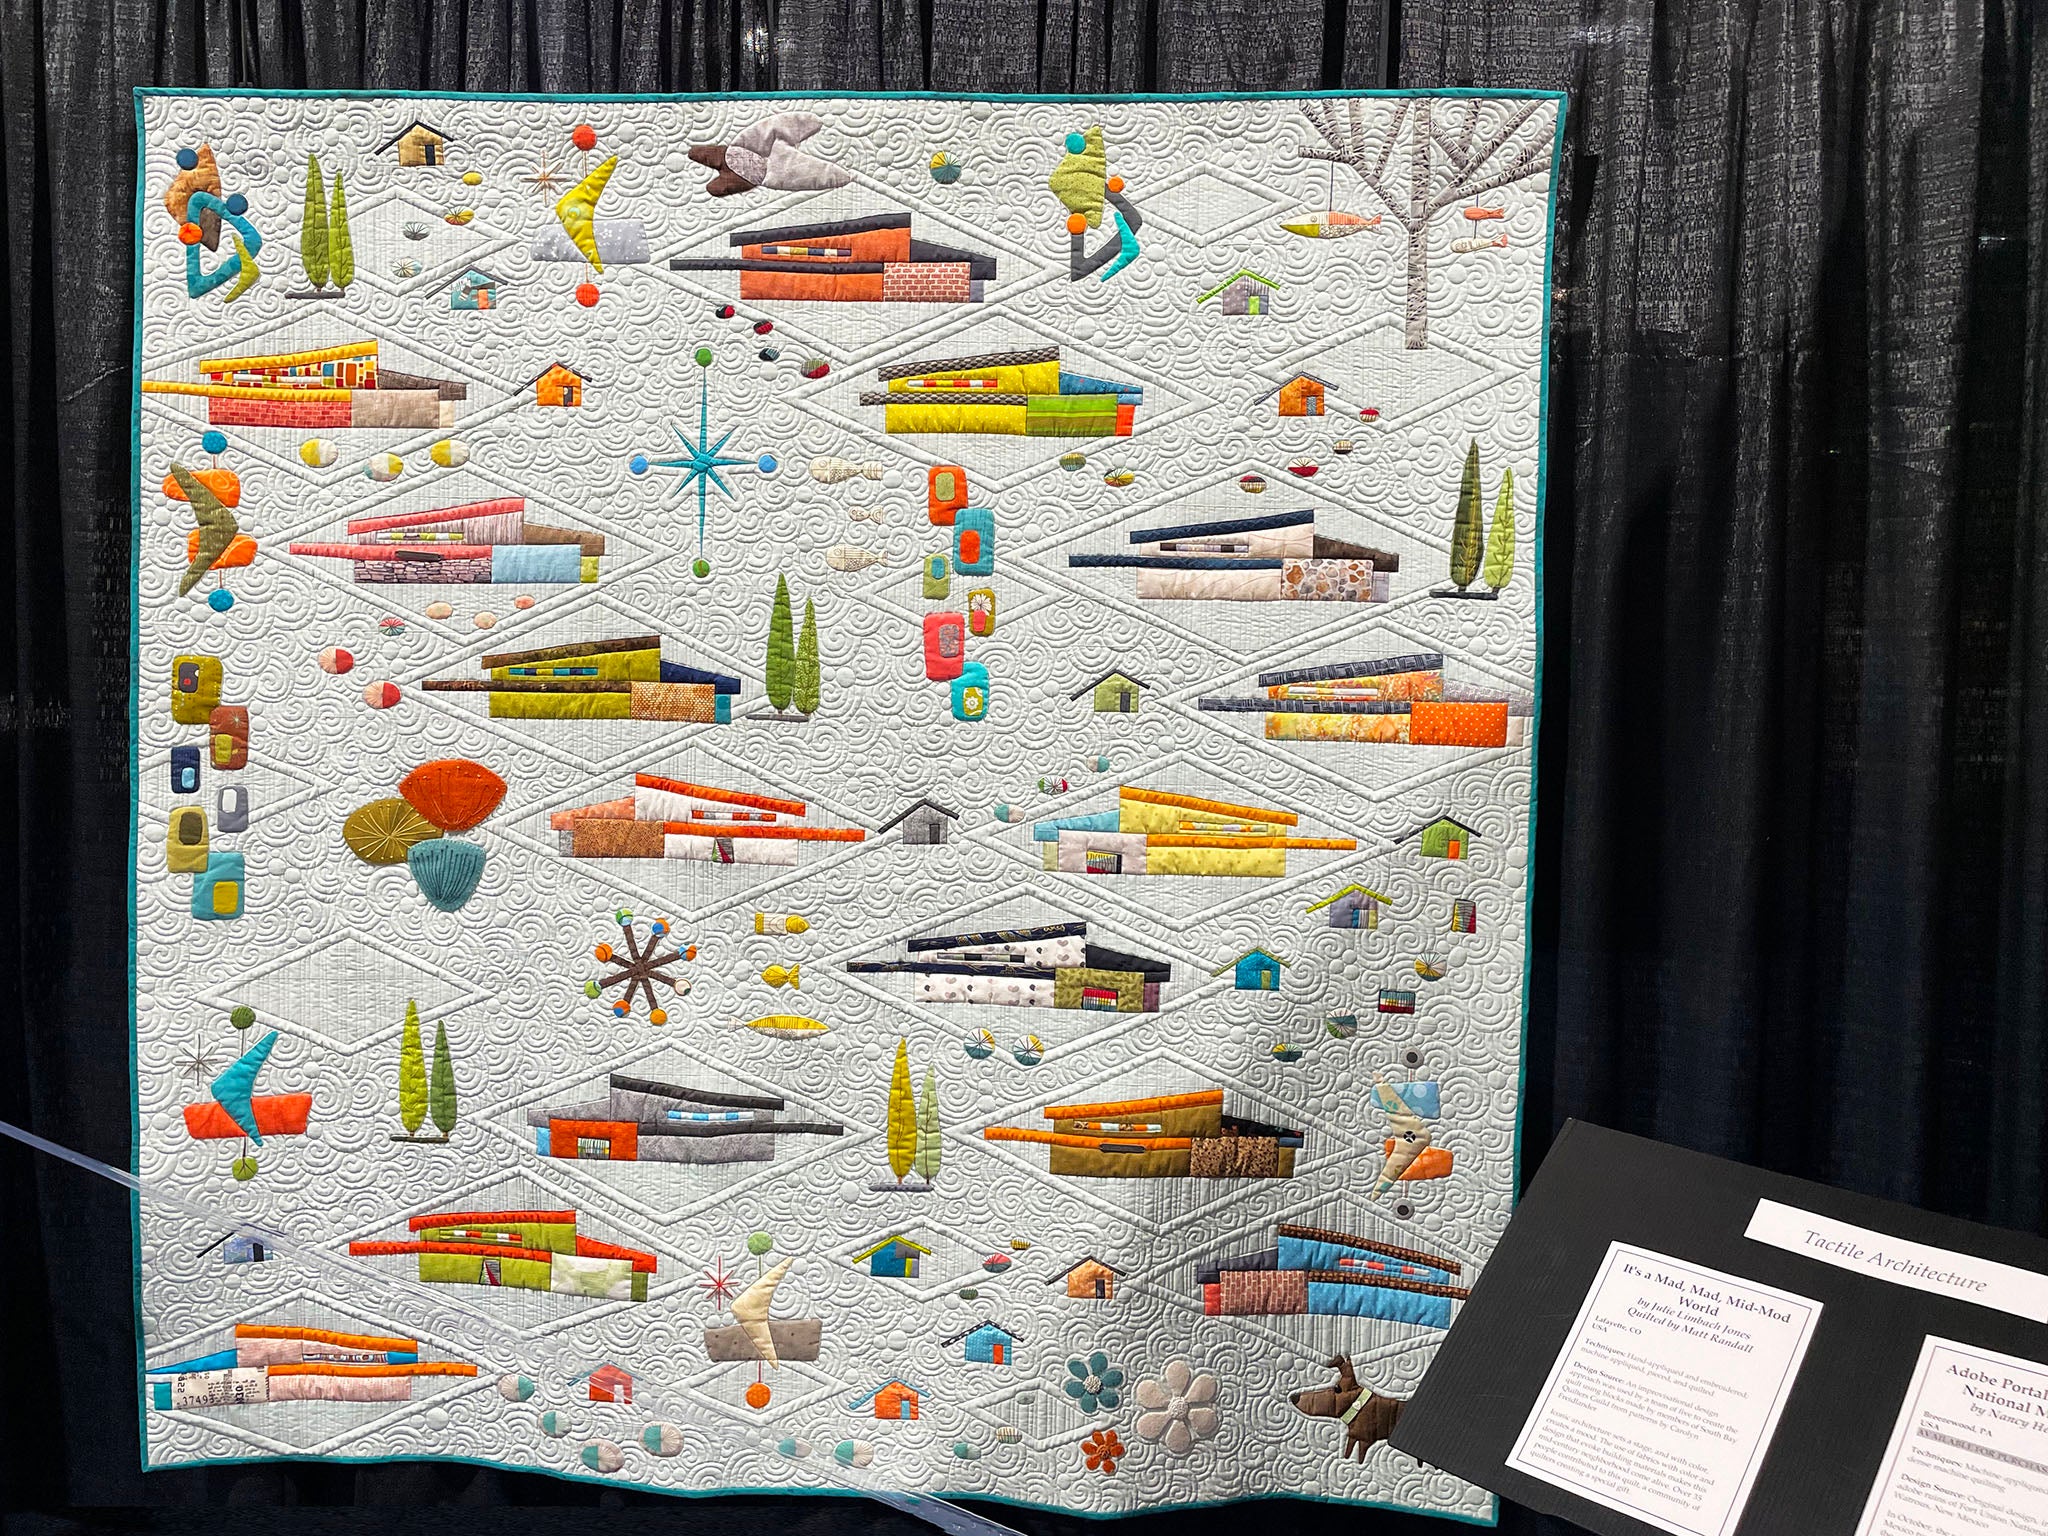 Long Beach Quilt Festival 2023 - It’s a Mad, Mad, Mid-Mod World by Julie Limbach Jones, quilted by Matt Randall - Photo By Victoria Stone